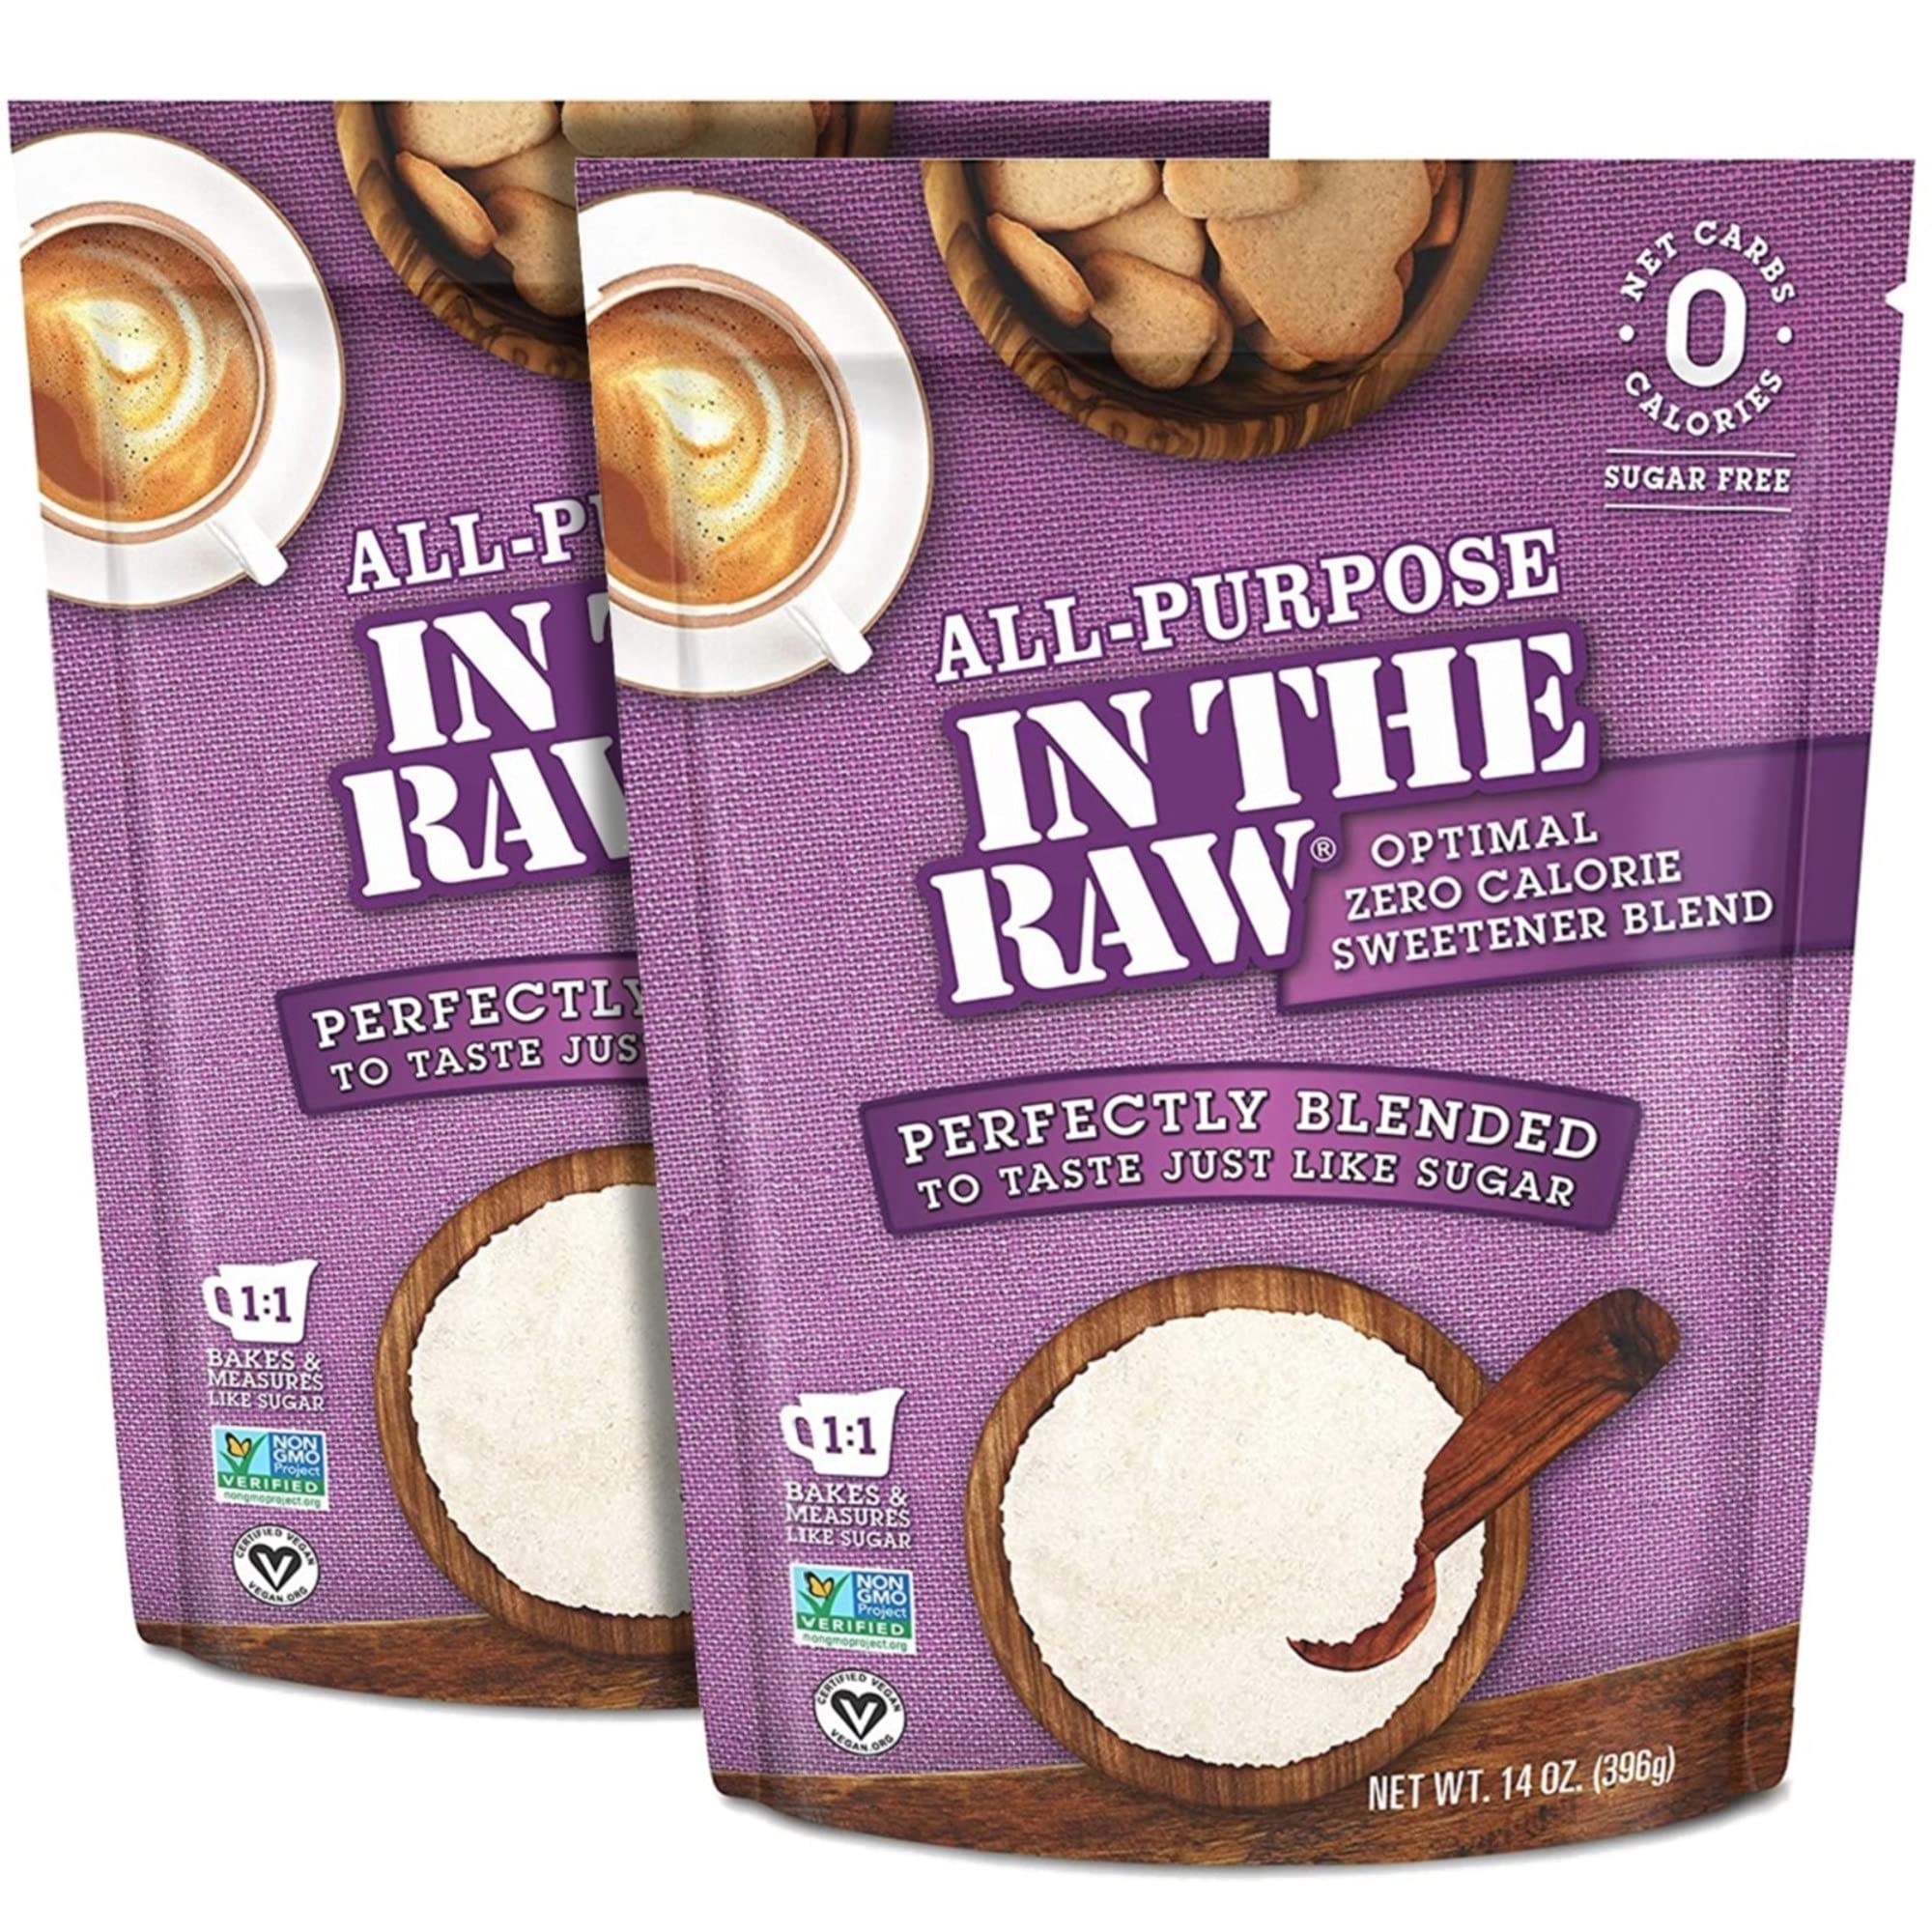 In The Raw All-Purpose Nature’s Zero-Calorie Sweetener, Blended to Taste Just Like Sugar, Purple, 14 Oz, Pack of 2